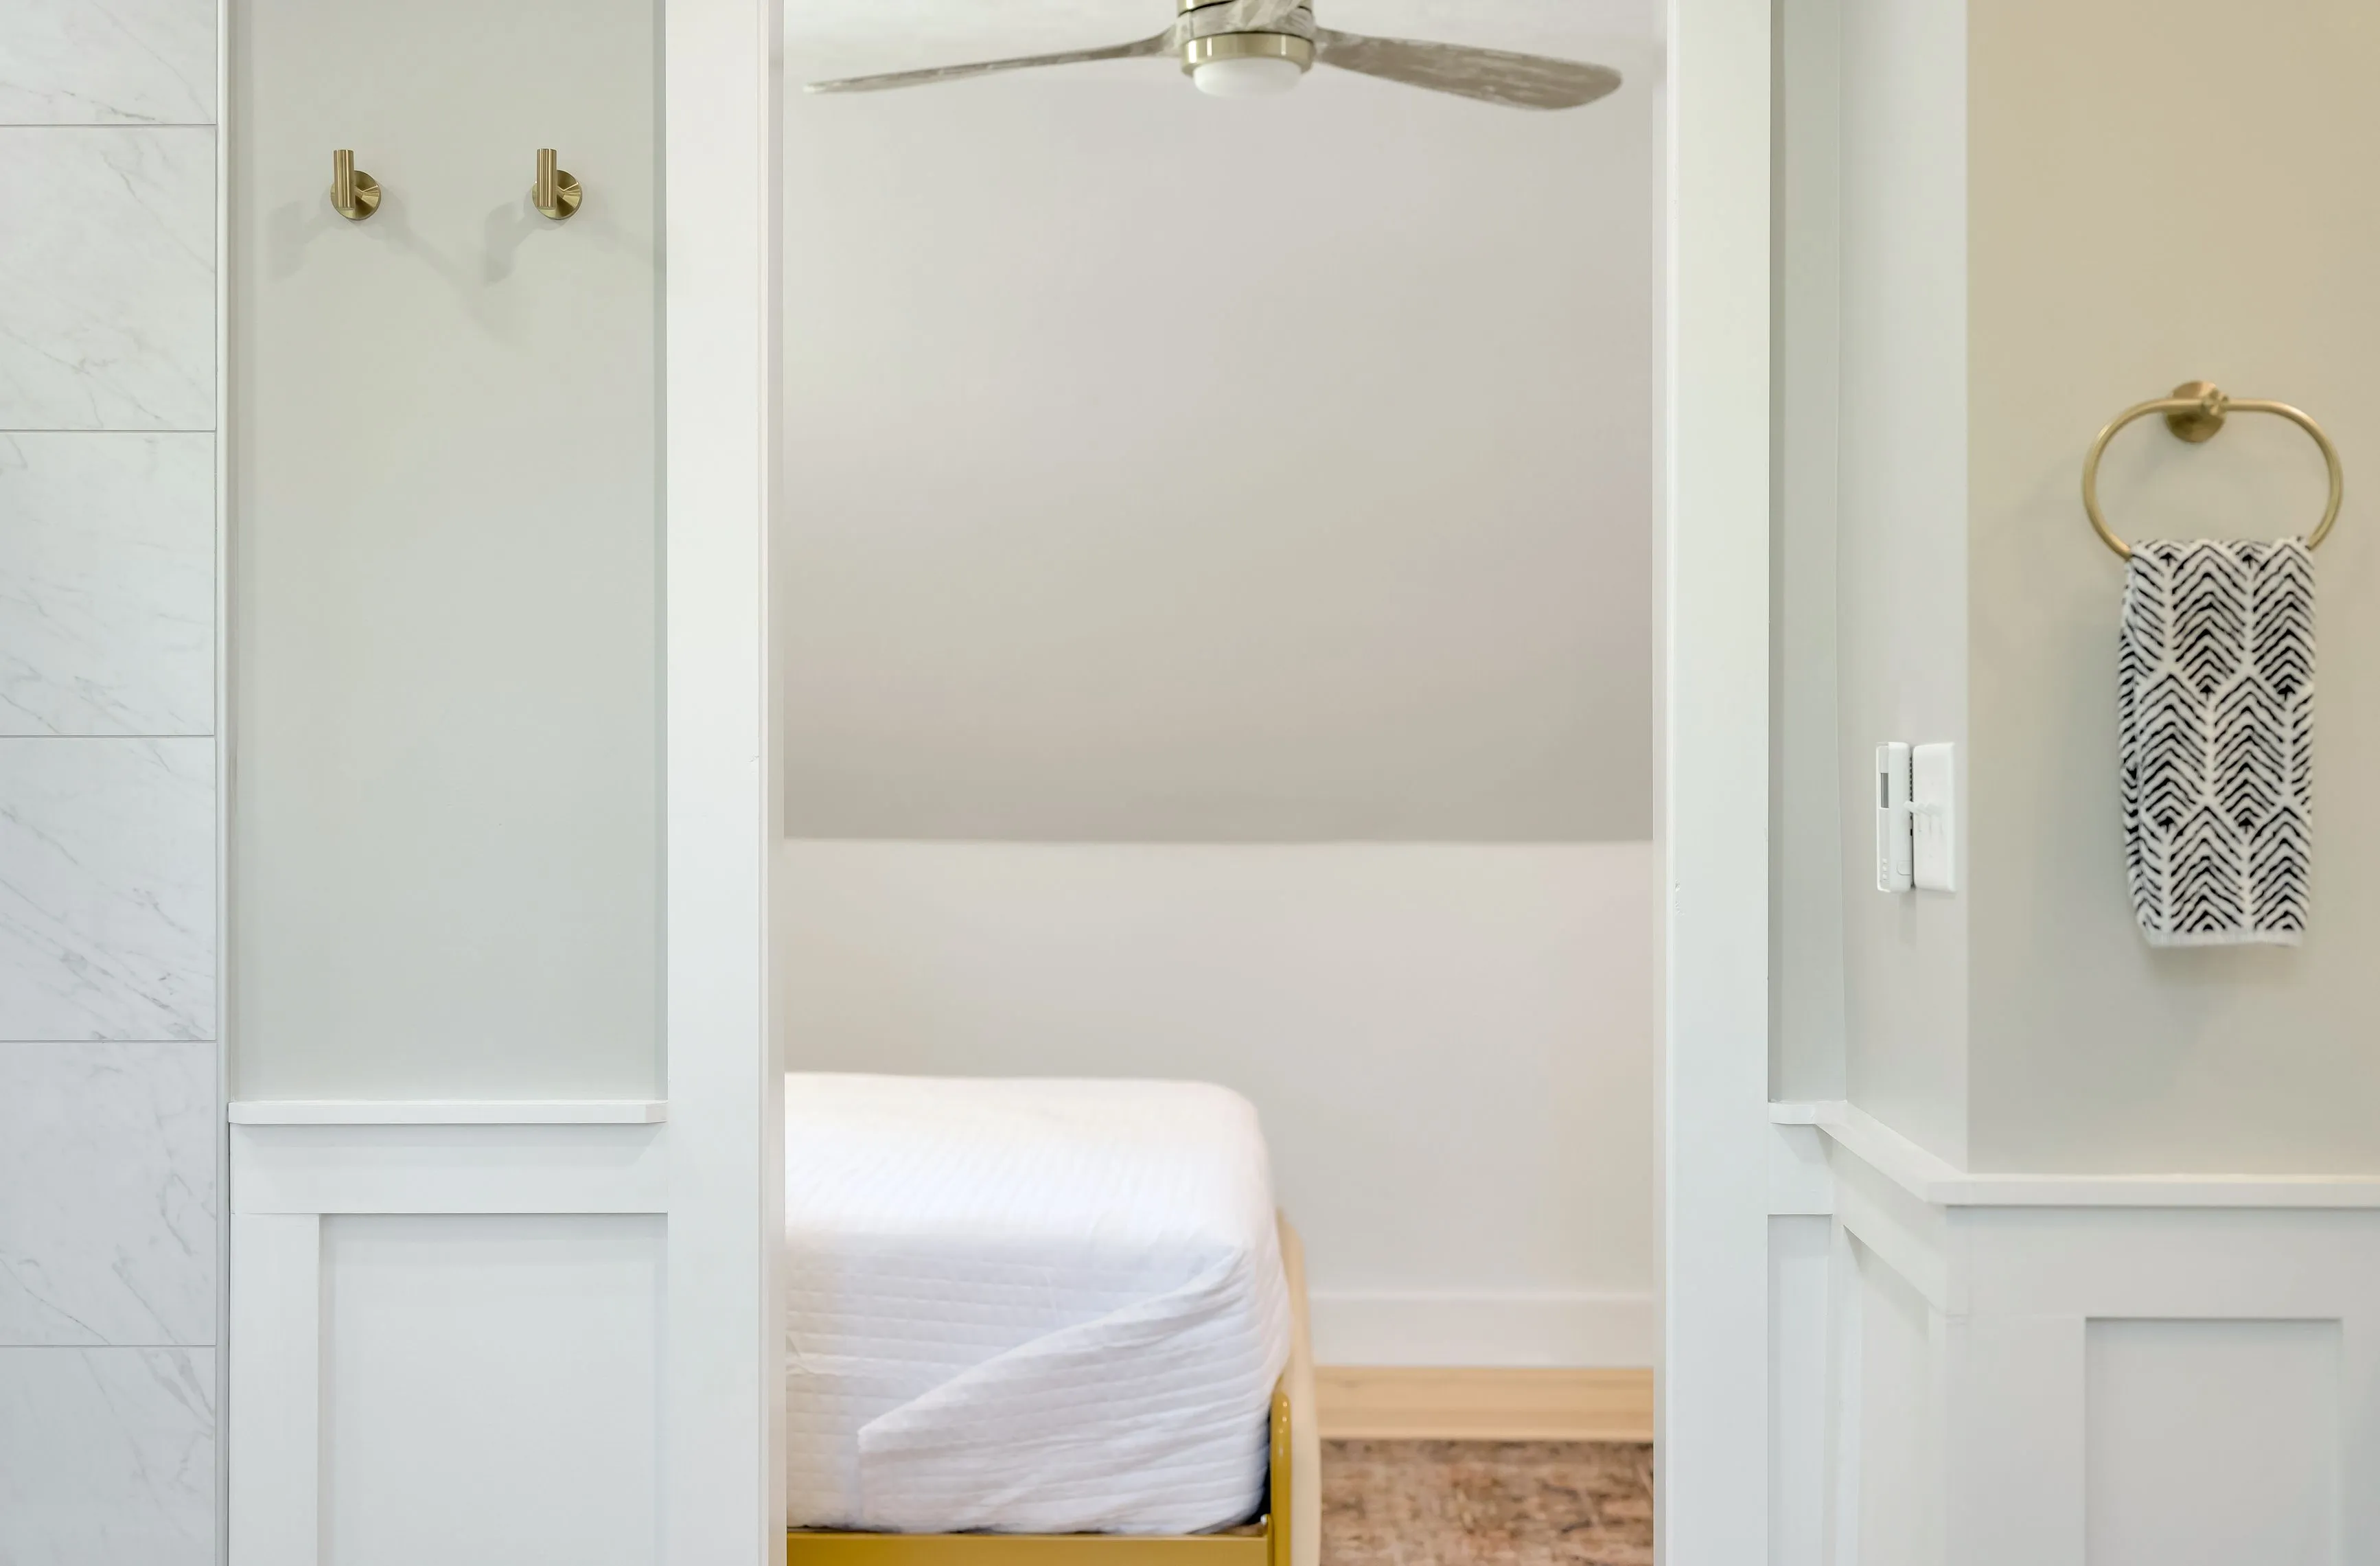 View from a bathroom looking into a bedroom with an open door, showing a ceiling fan above and a bed with white bedding in the distance.